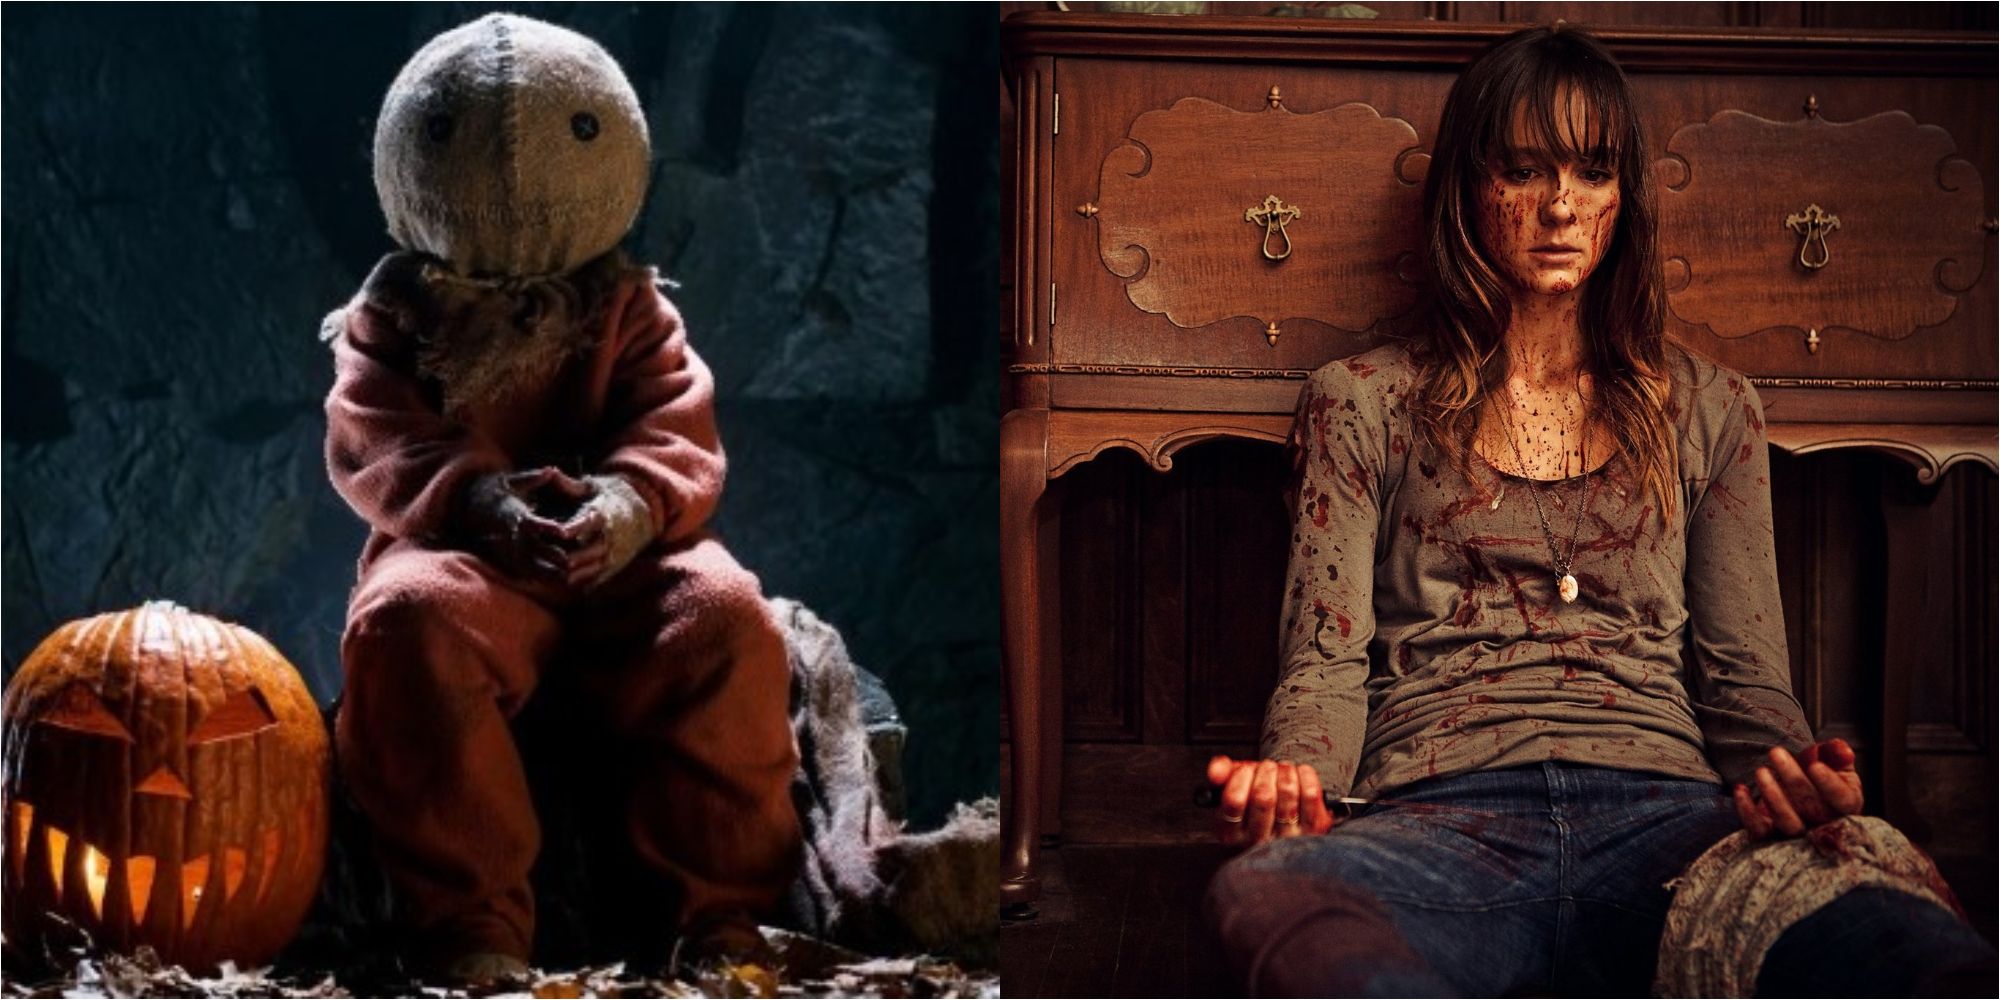 Split image showing characters from Trick r' Treat and You're Next.